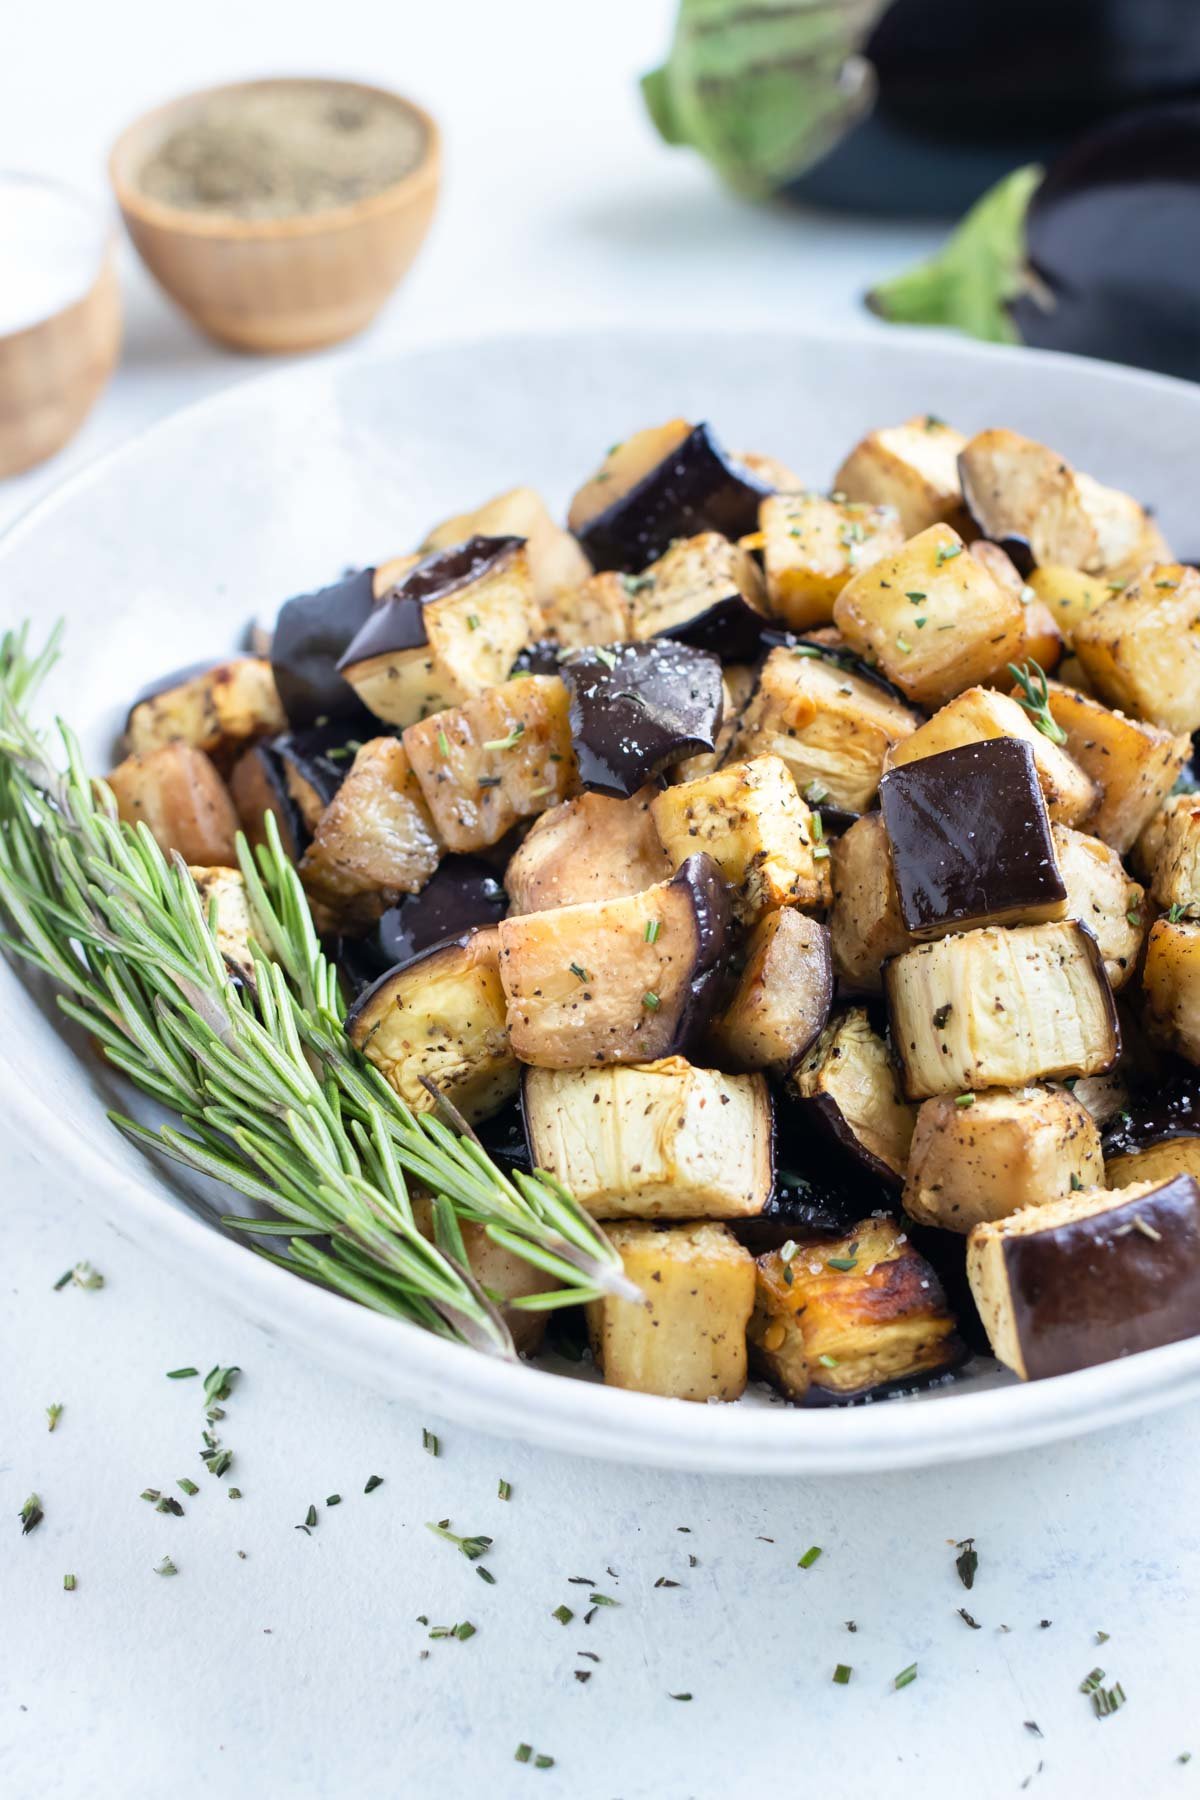 Crispy cubed eggplant is enjoyed from a white bowl with fresh herbs.